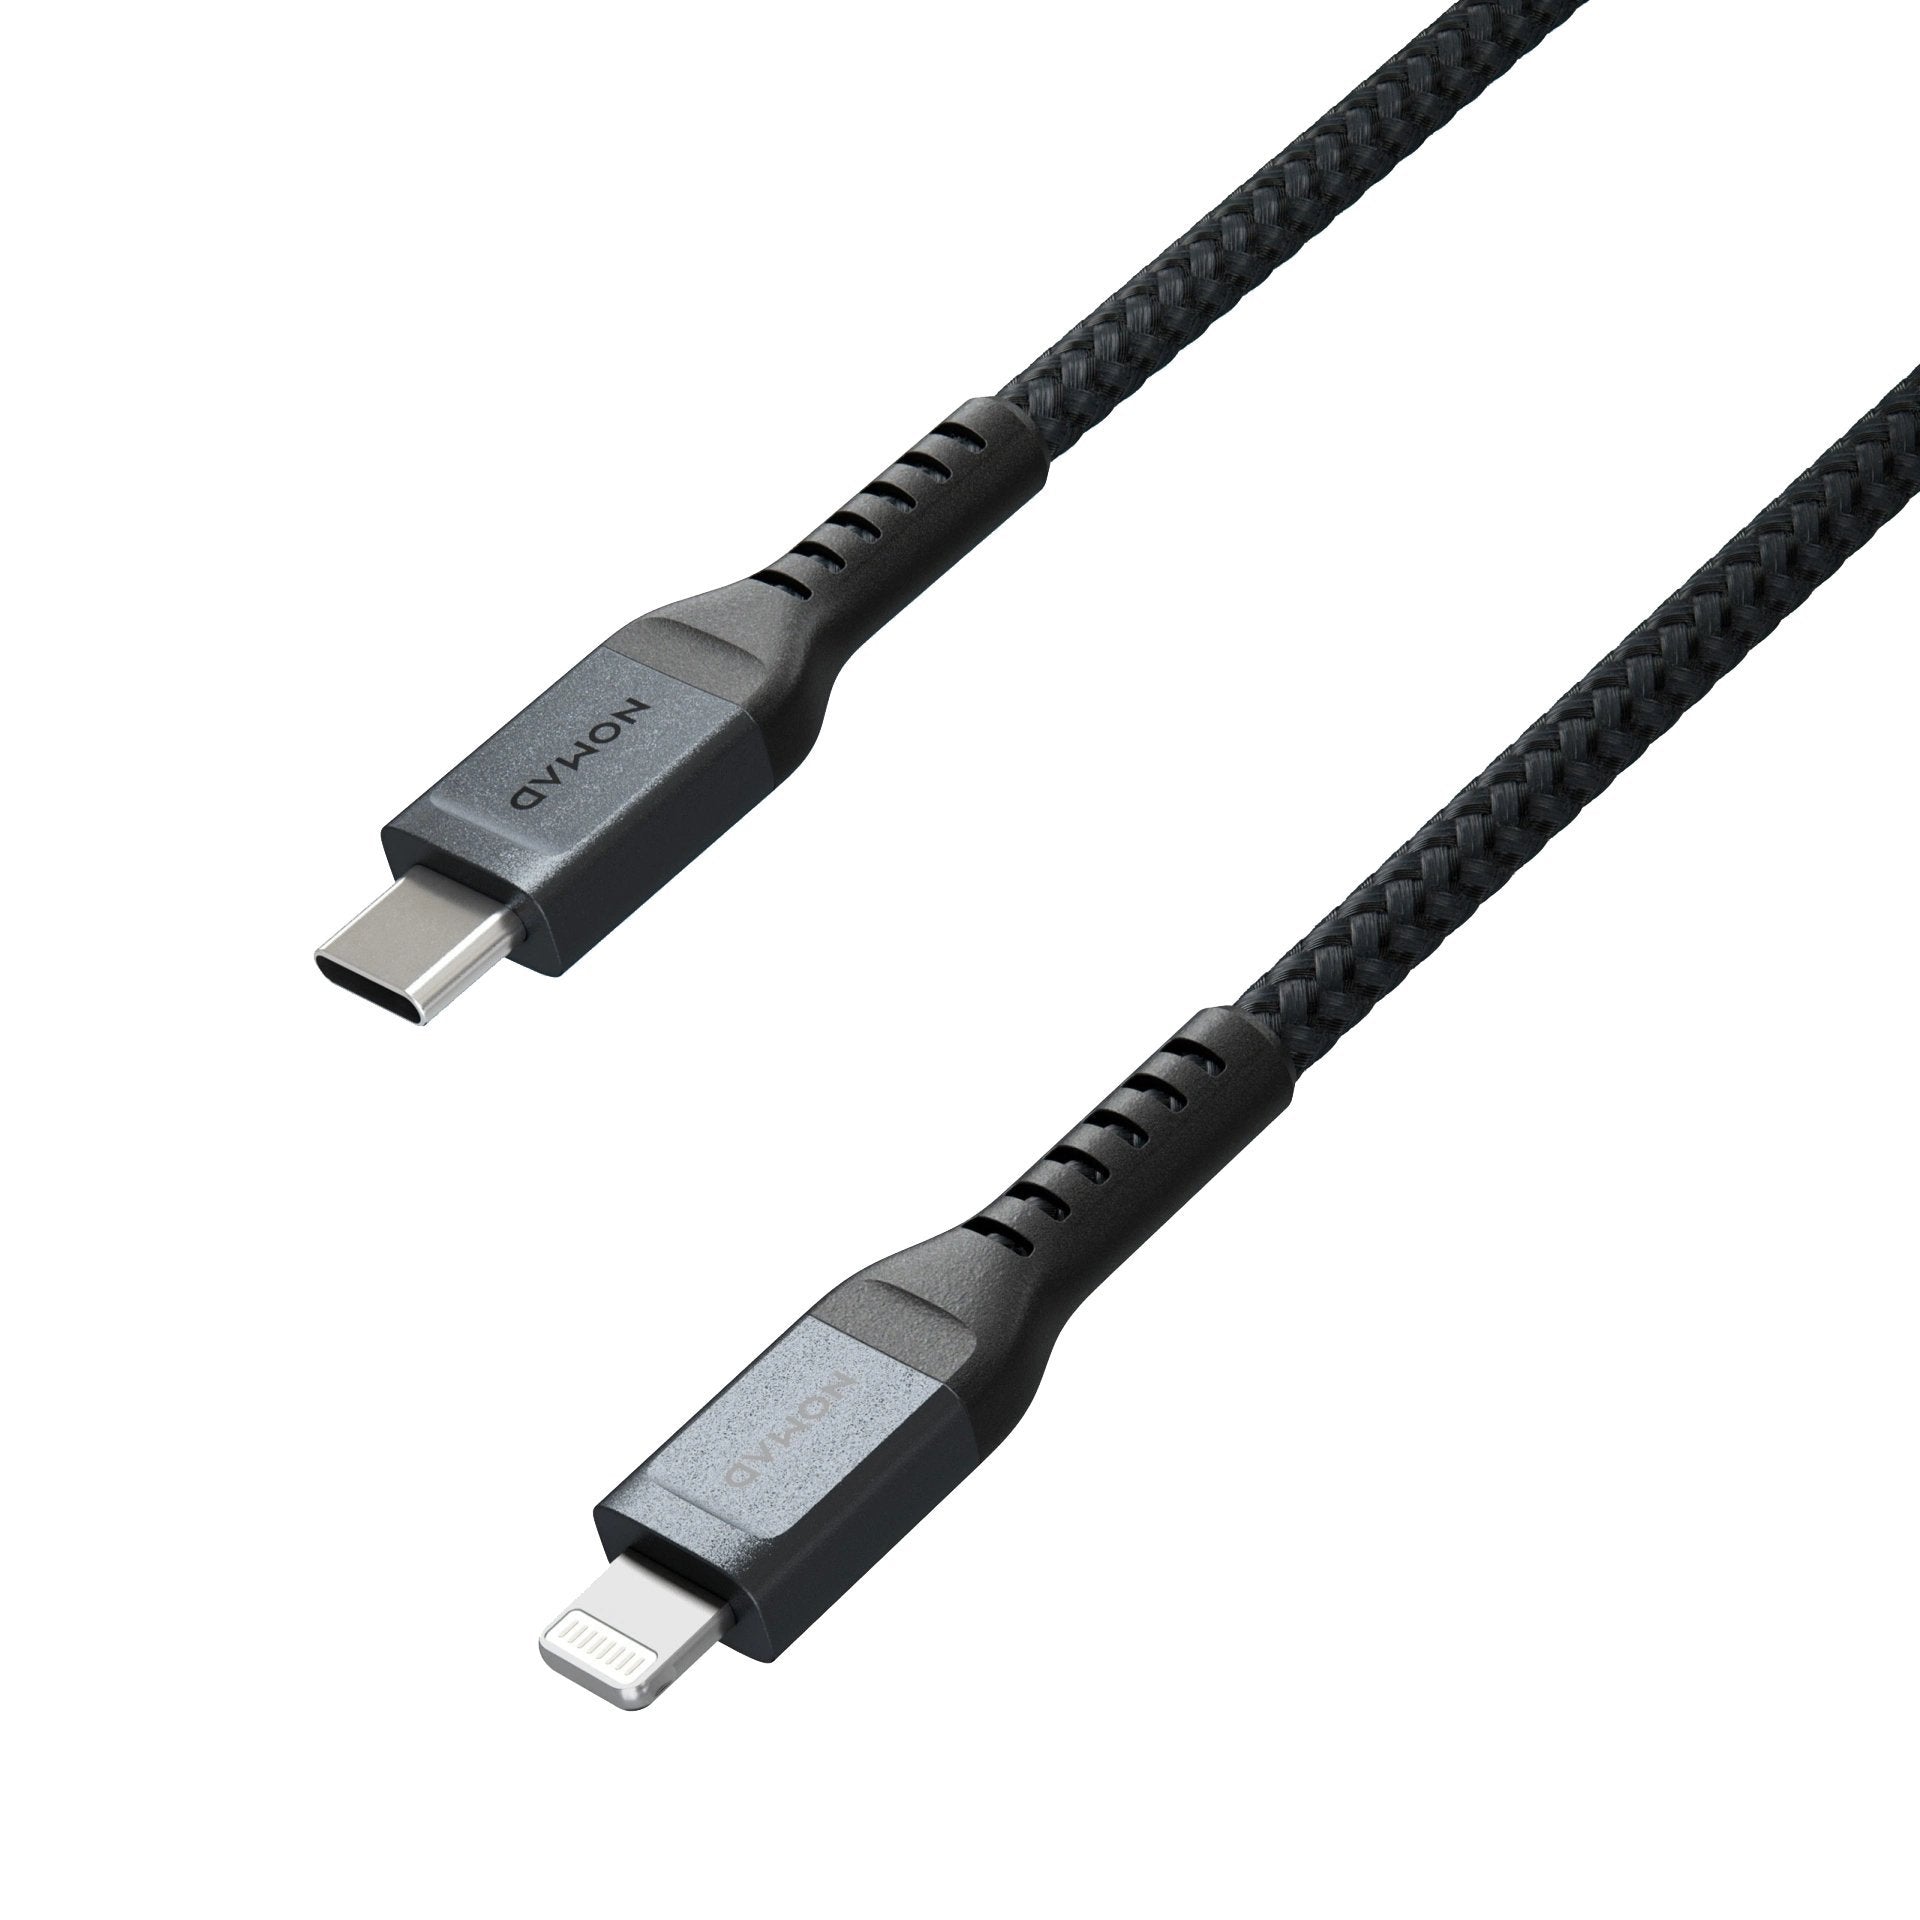 NOMAD Rugged USB-A to Lightning Cables 3M, Black Cable NOMAD 